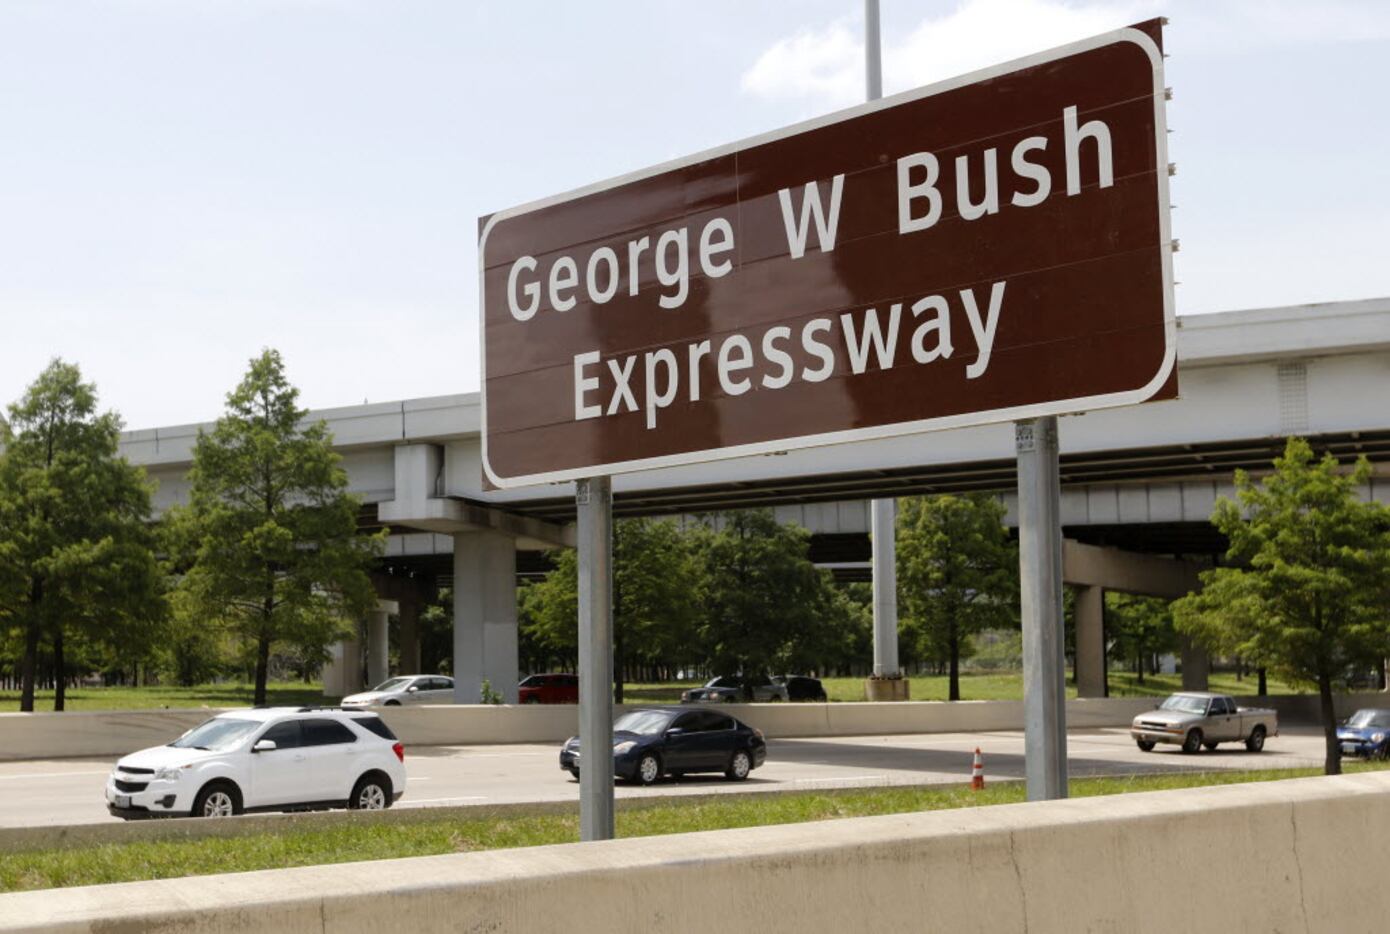 George W. Bush Expressway is just a portion of North Central Expressway, near his...